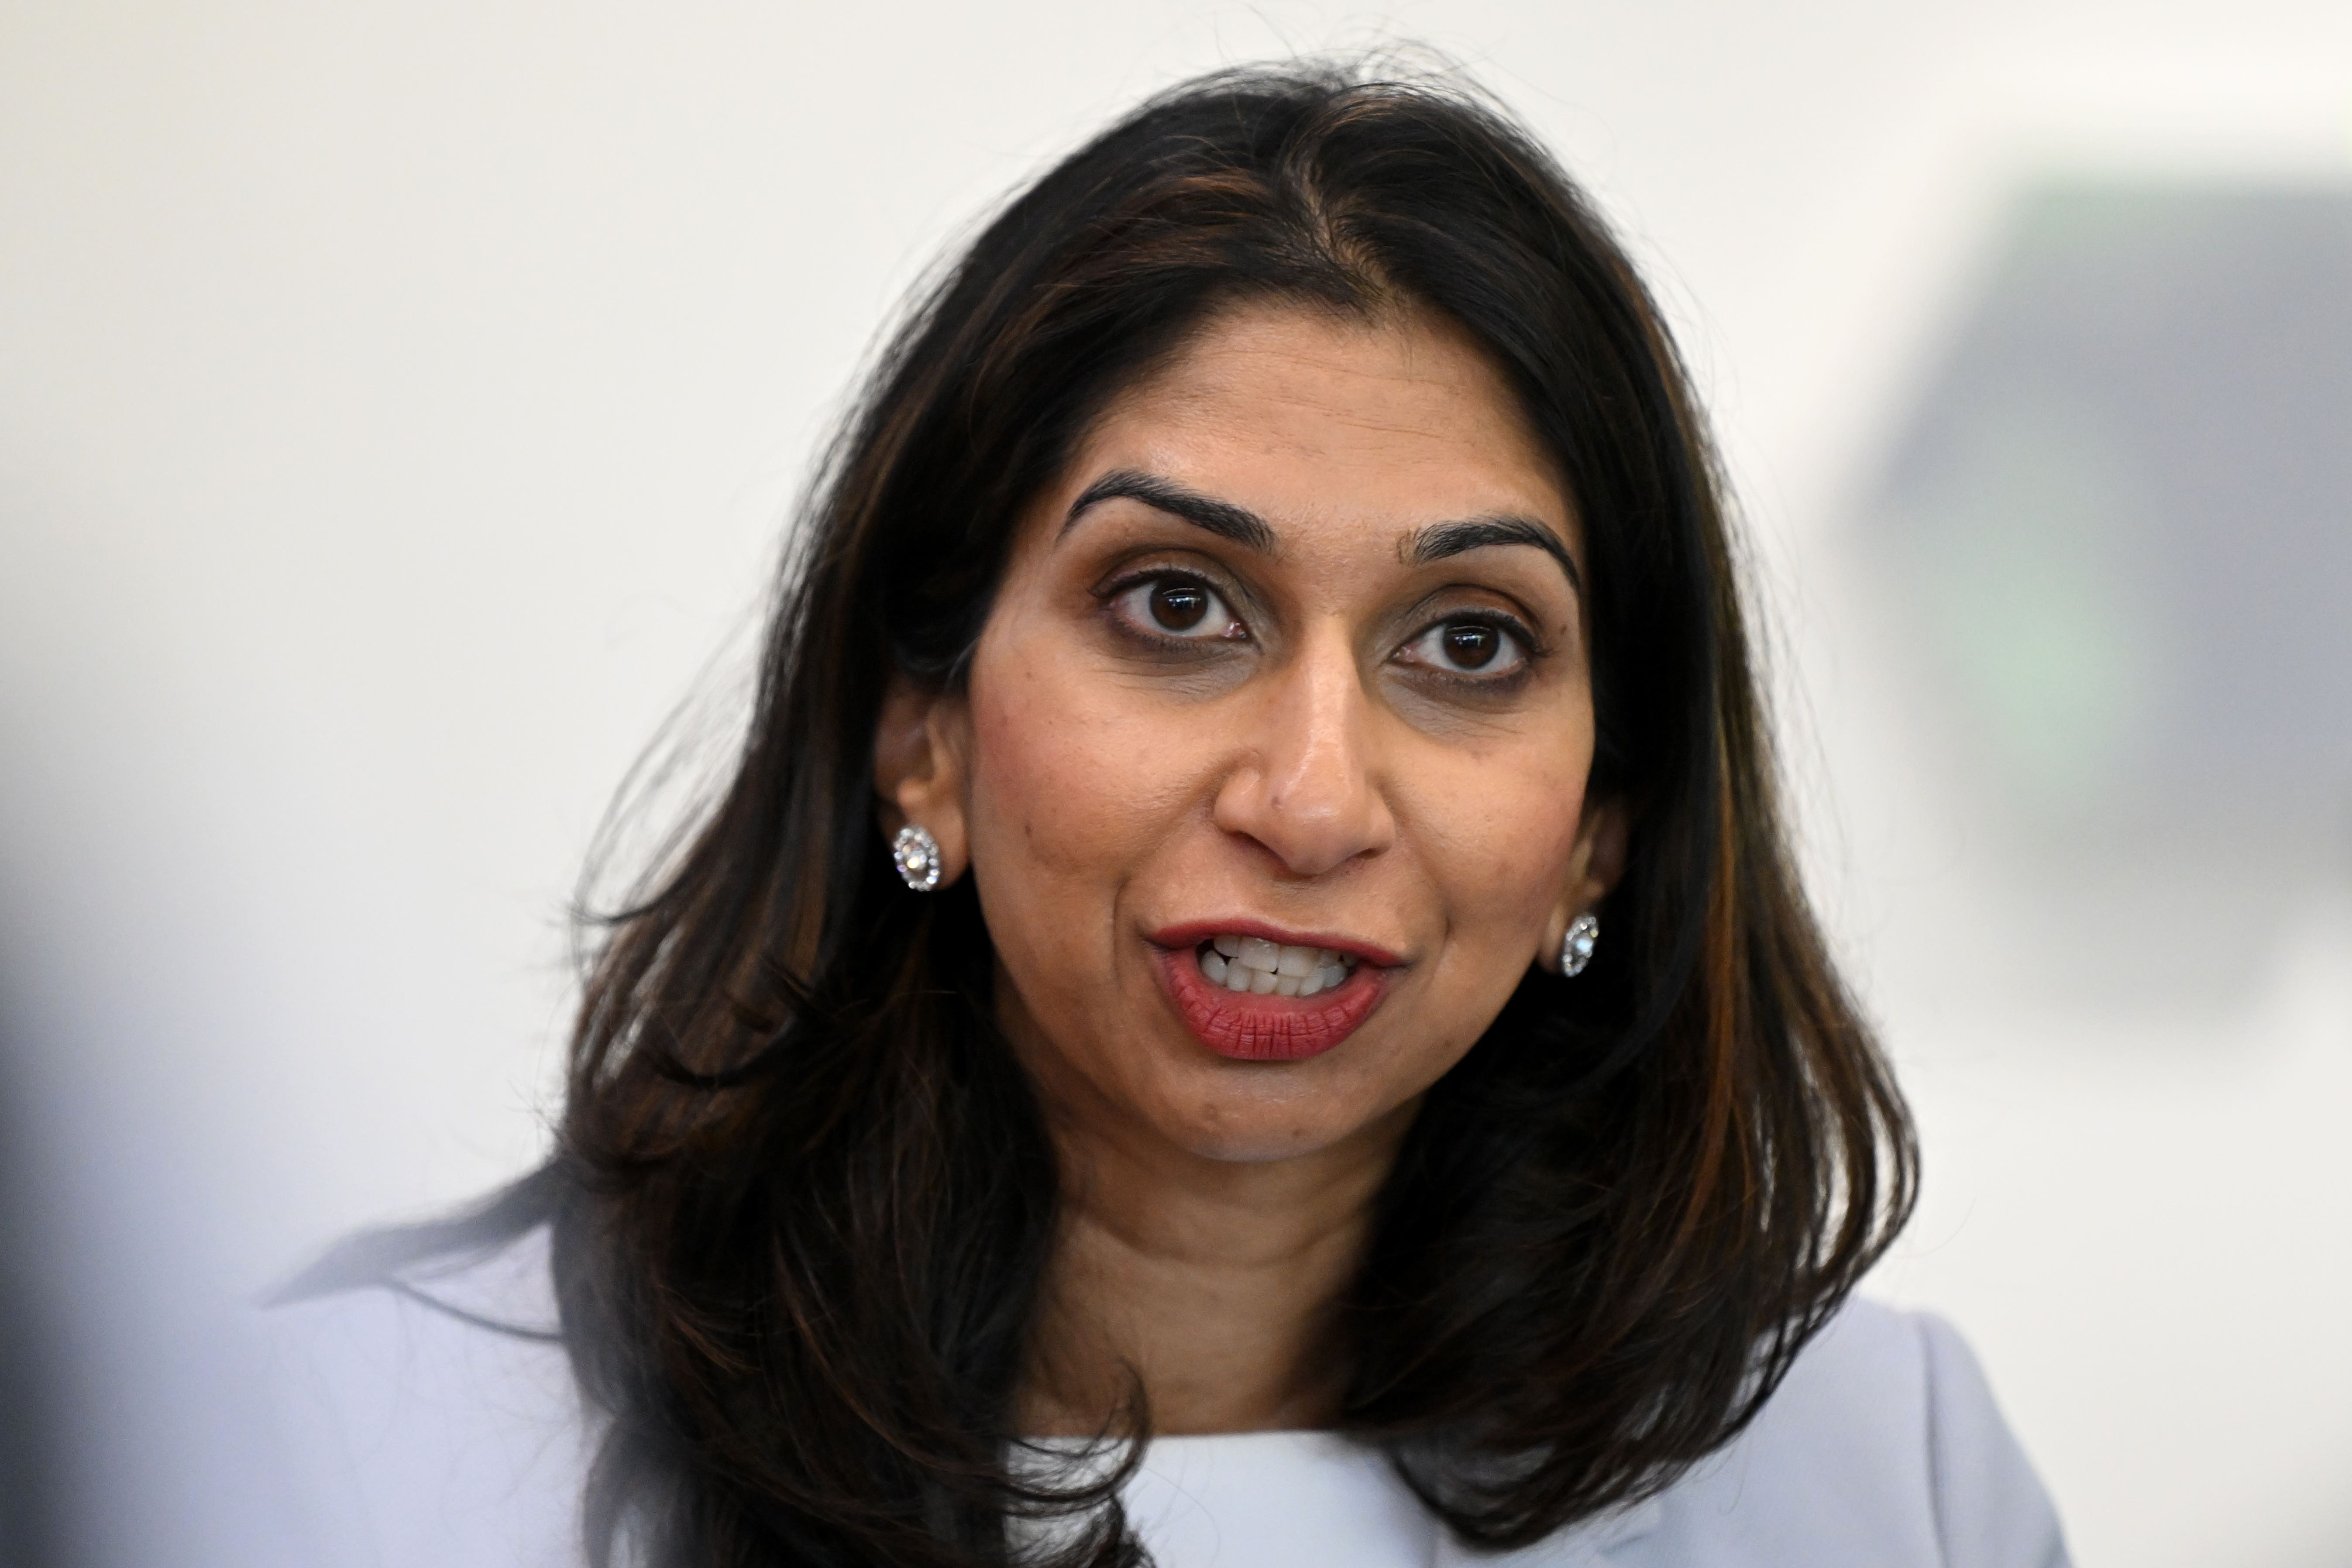 Suella Braverman has sought to weaponise the Remembrance commemoration for her own purposes